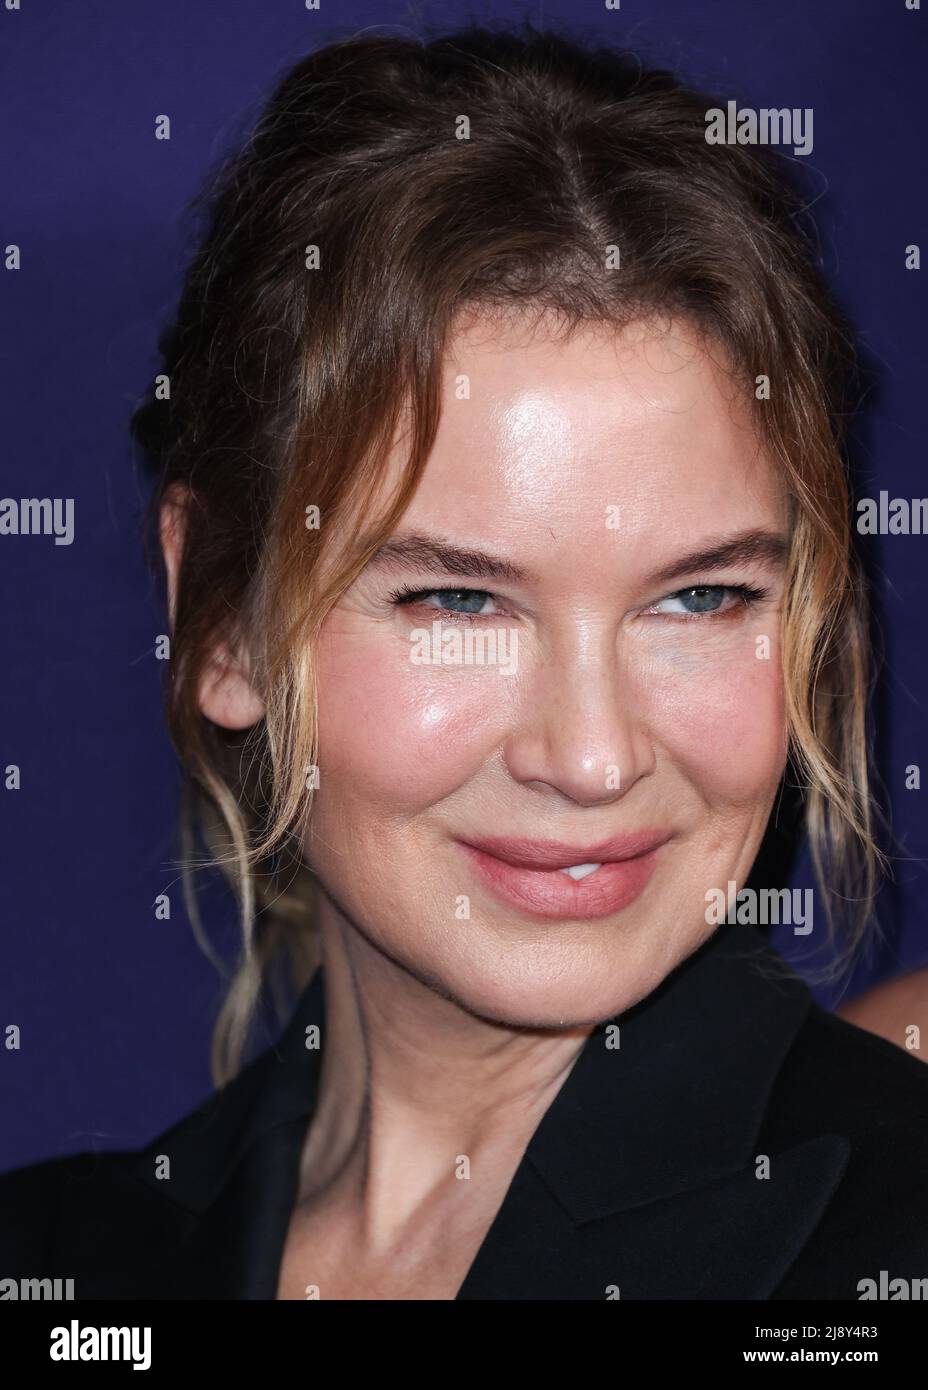 Hollywood, United States. 18th May, 2022. HOLLYWOOD, LOS ANGELES, CALIFORNIA, USA - MAY 18: American actress Renée Zellweger (Renee Zellweger) arrives at NBCUniversal's FYC Event For 'The Thing About Pam' held at the NBCU FYC House on May 18, 2022 in Hollywood, Los Angeles, California, United States. (Photo by Xavier Collin/Image Press Agency) Credit: Image Press Agency/Alamy Live News Stock Photo